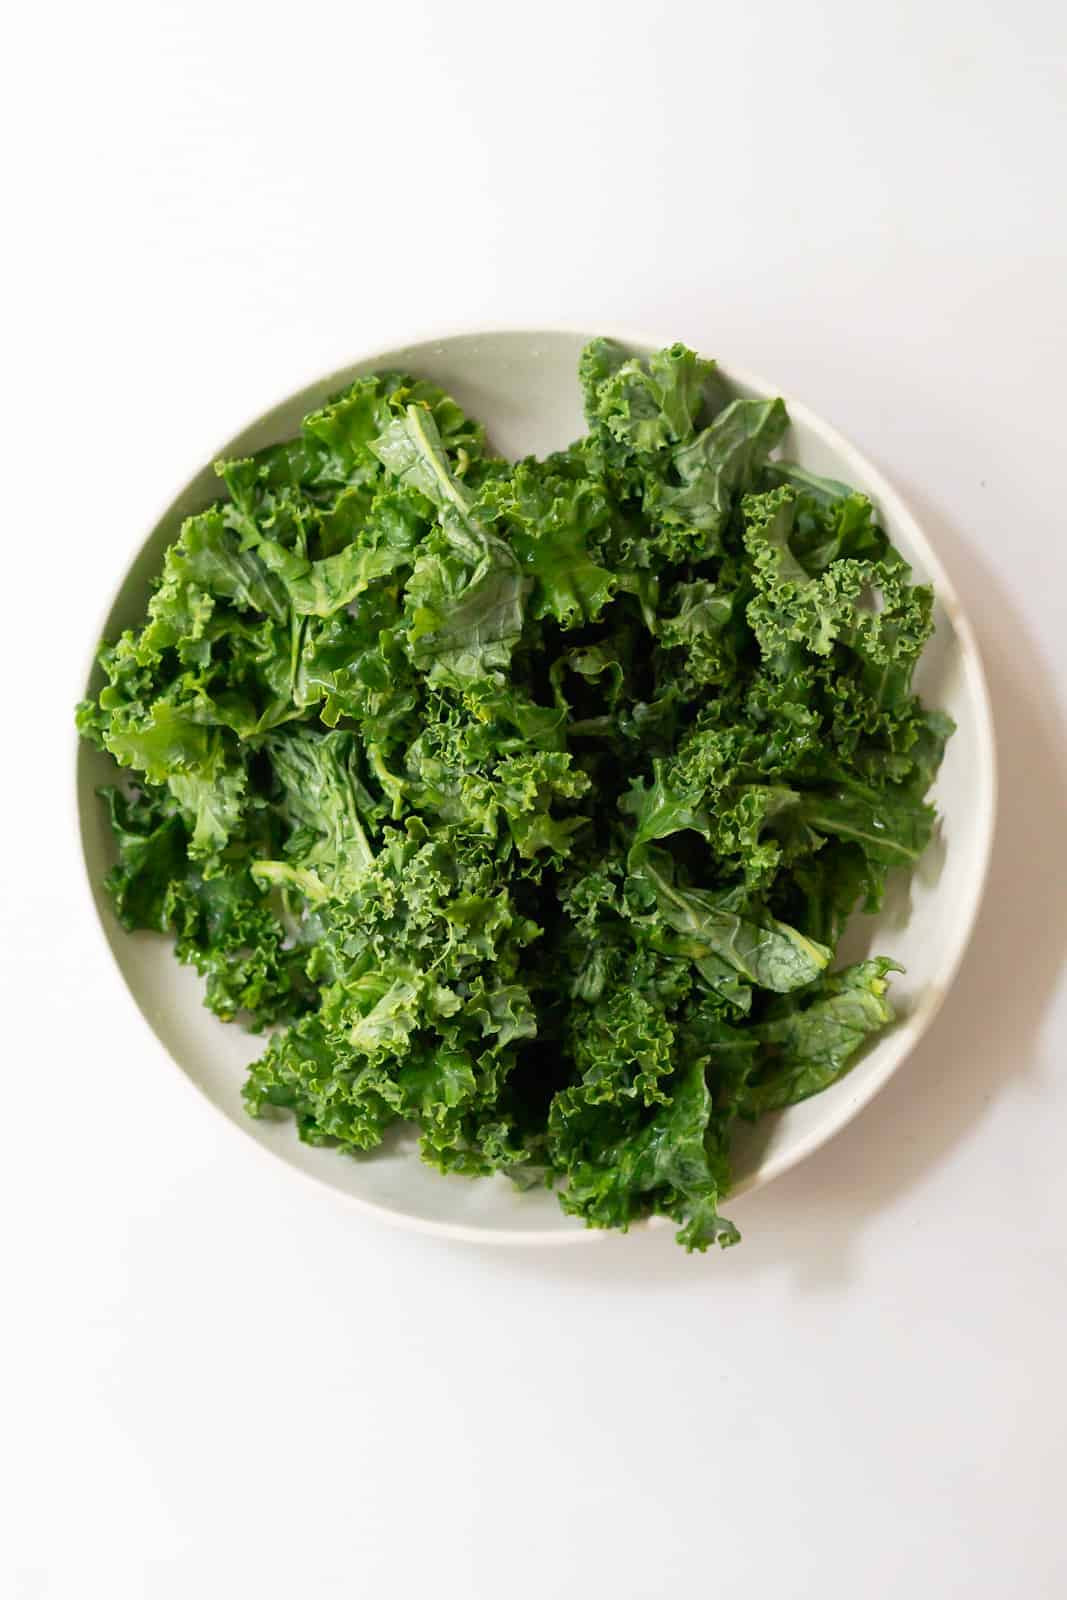 Overhead view of kale leaves torn into bite-sized pieces and massaged until tender.